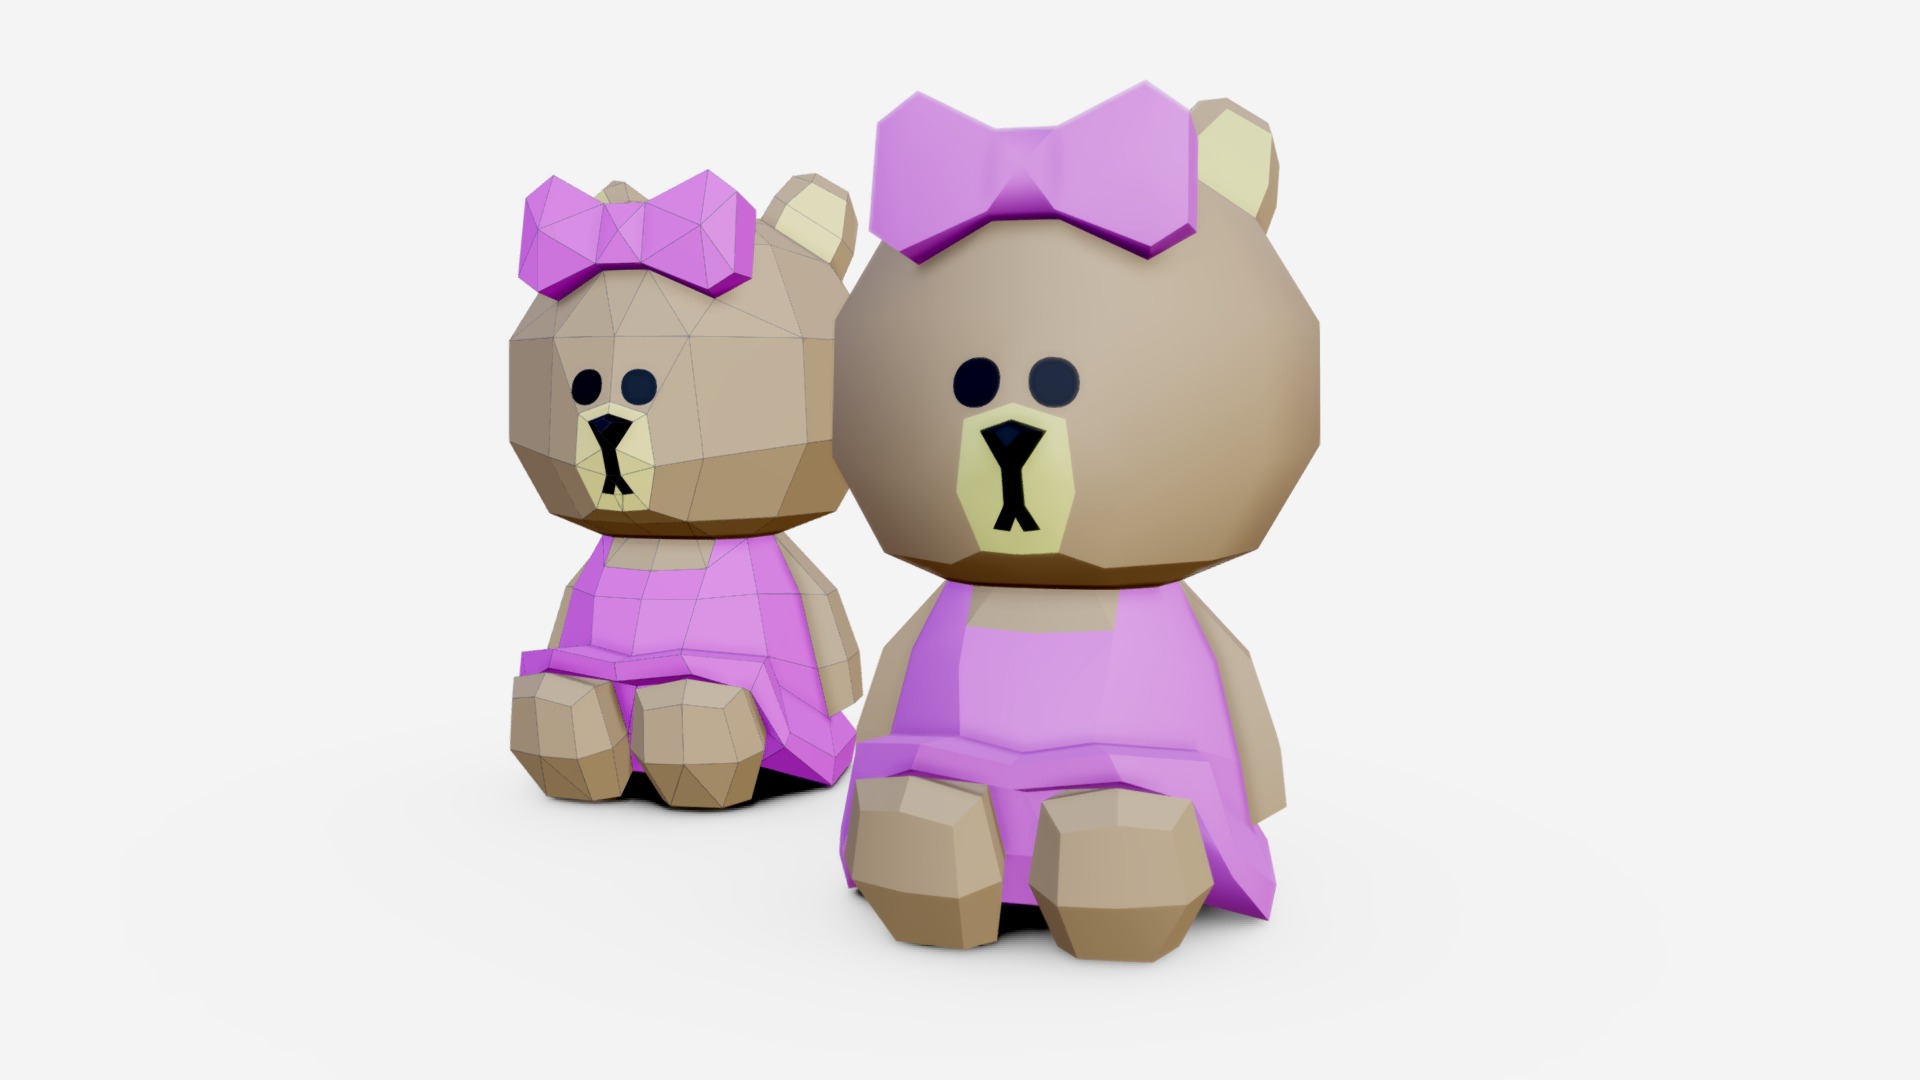 3D model Choco - This is a 3D model of the Choco. The 3D model is about a couple of stuffed animals.